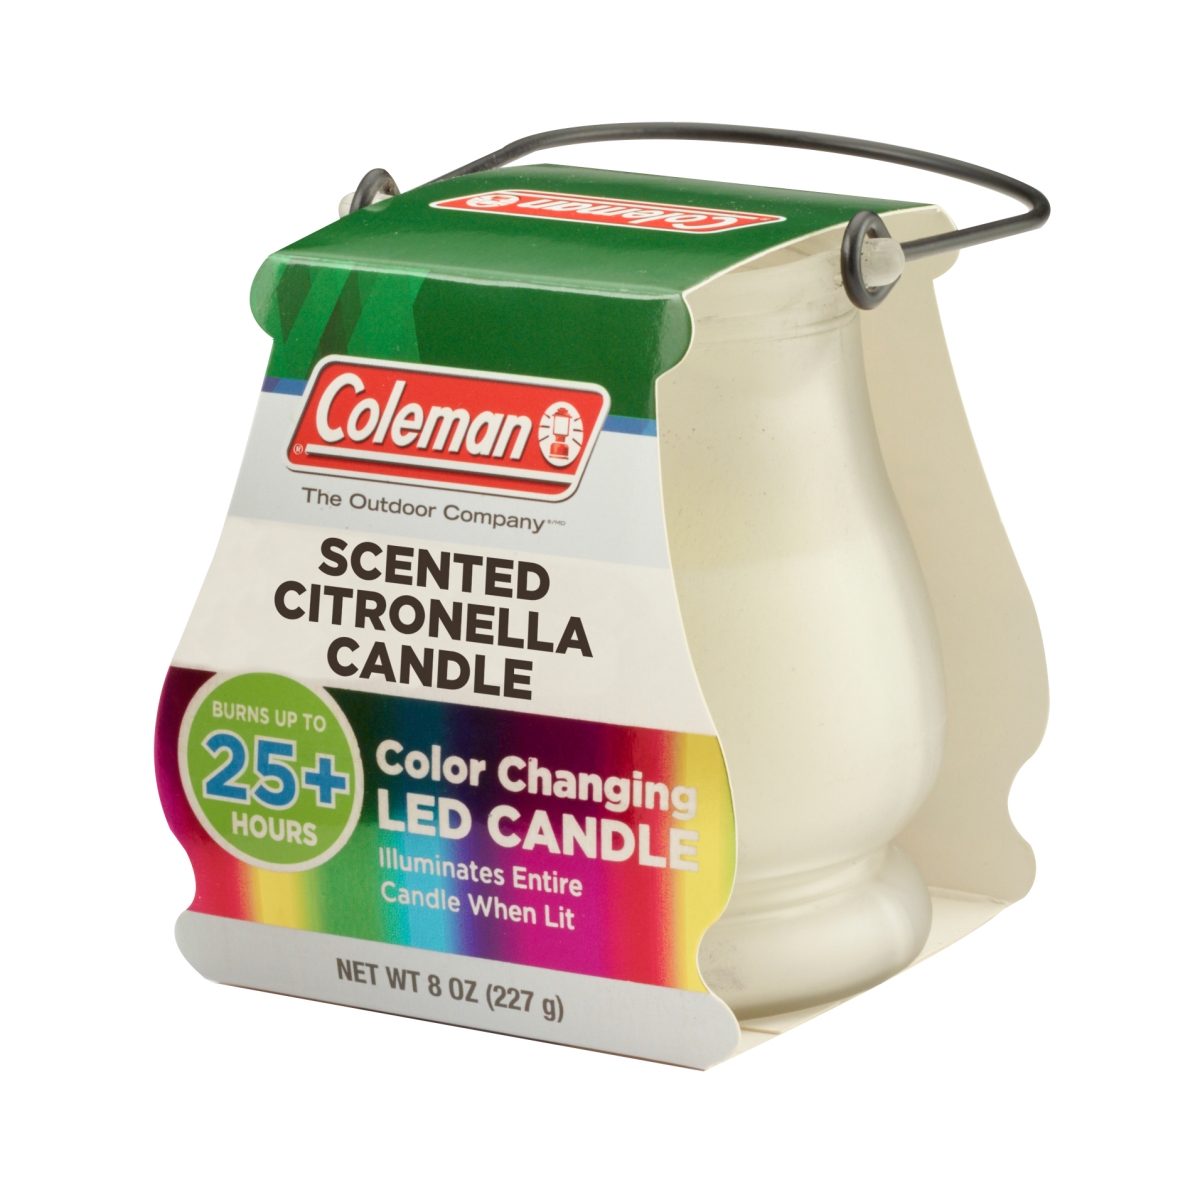 Wpc-7710 2019 Coleman Led Candle With Wrap Scented